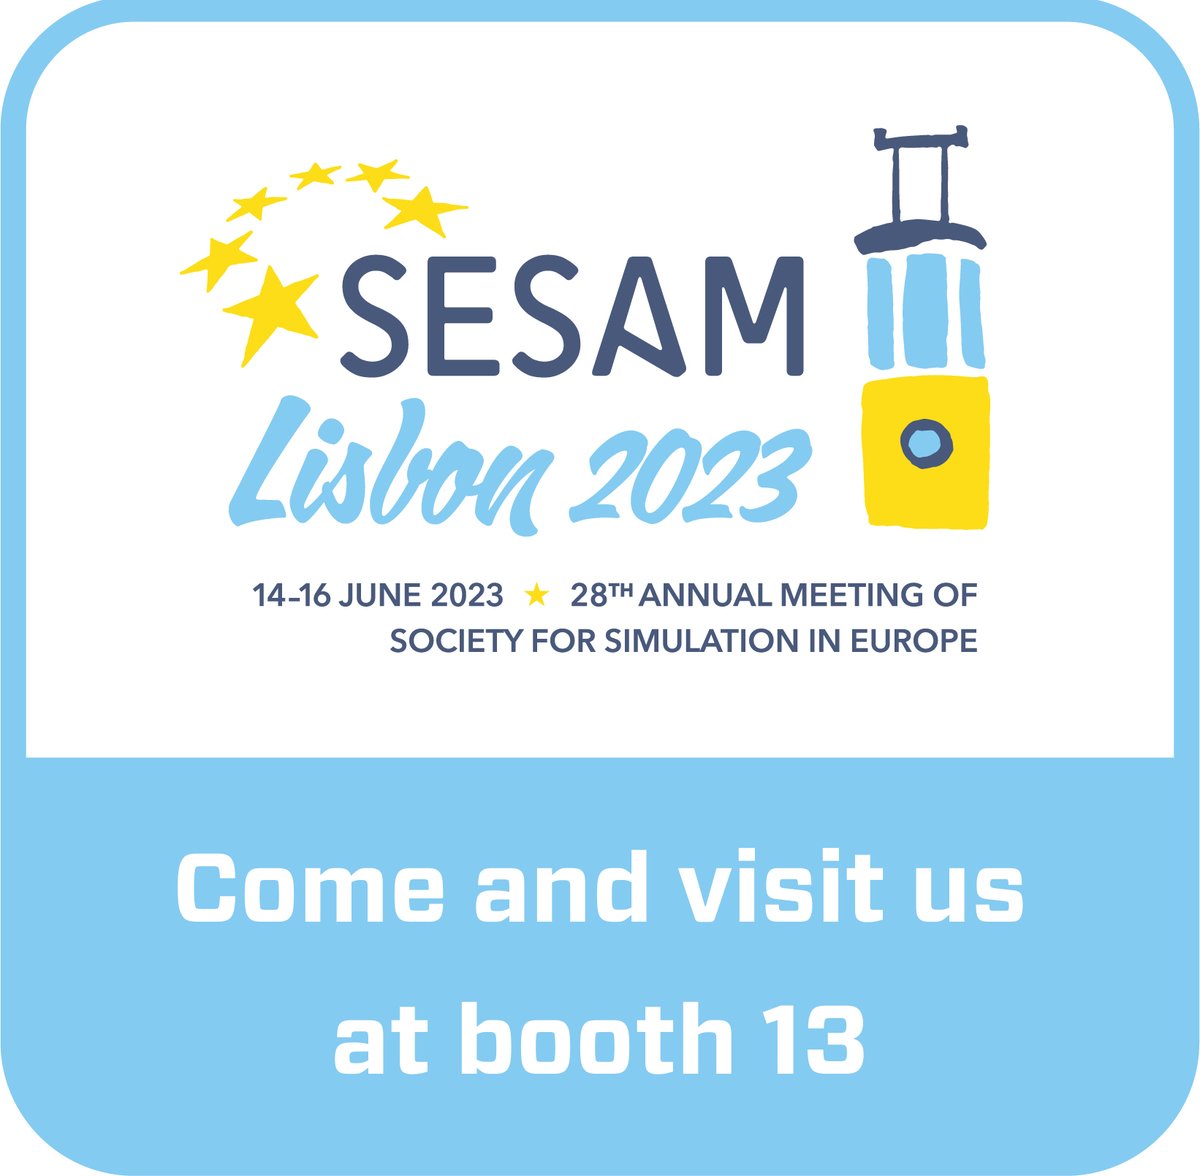 Experience the future of simulation at @SESAMSimulation
2023 annual meeting, June 14-16 in Lisbon, Portugal! Visit TacMed Solutions at booth 13 to see our latest innovations and get hands-on demos of our high-fidelity simulators.

 #SESAM2023 #simulation #simulationconference